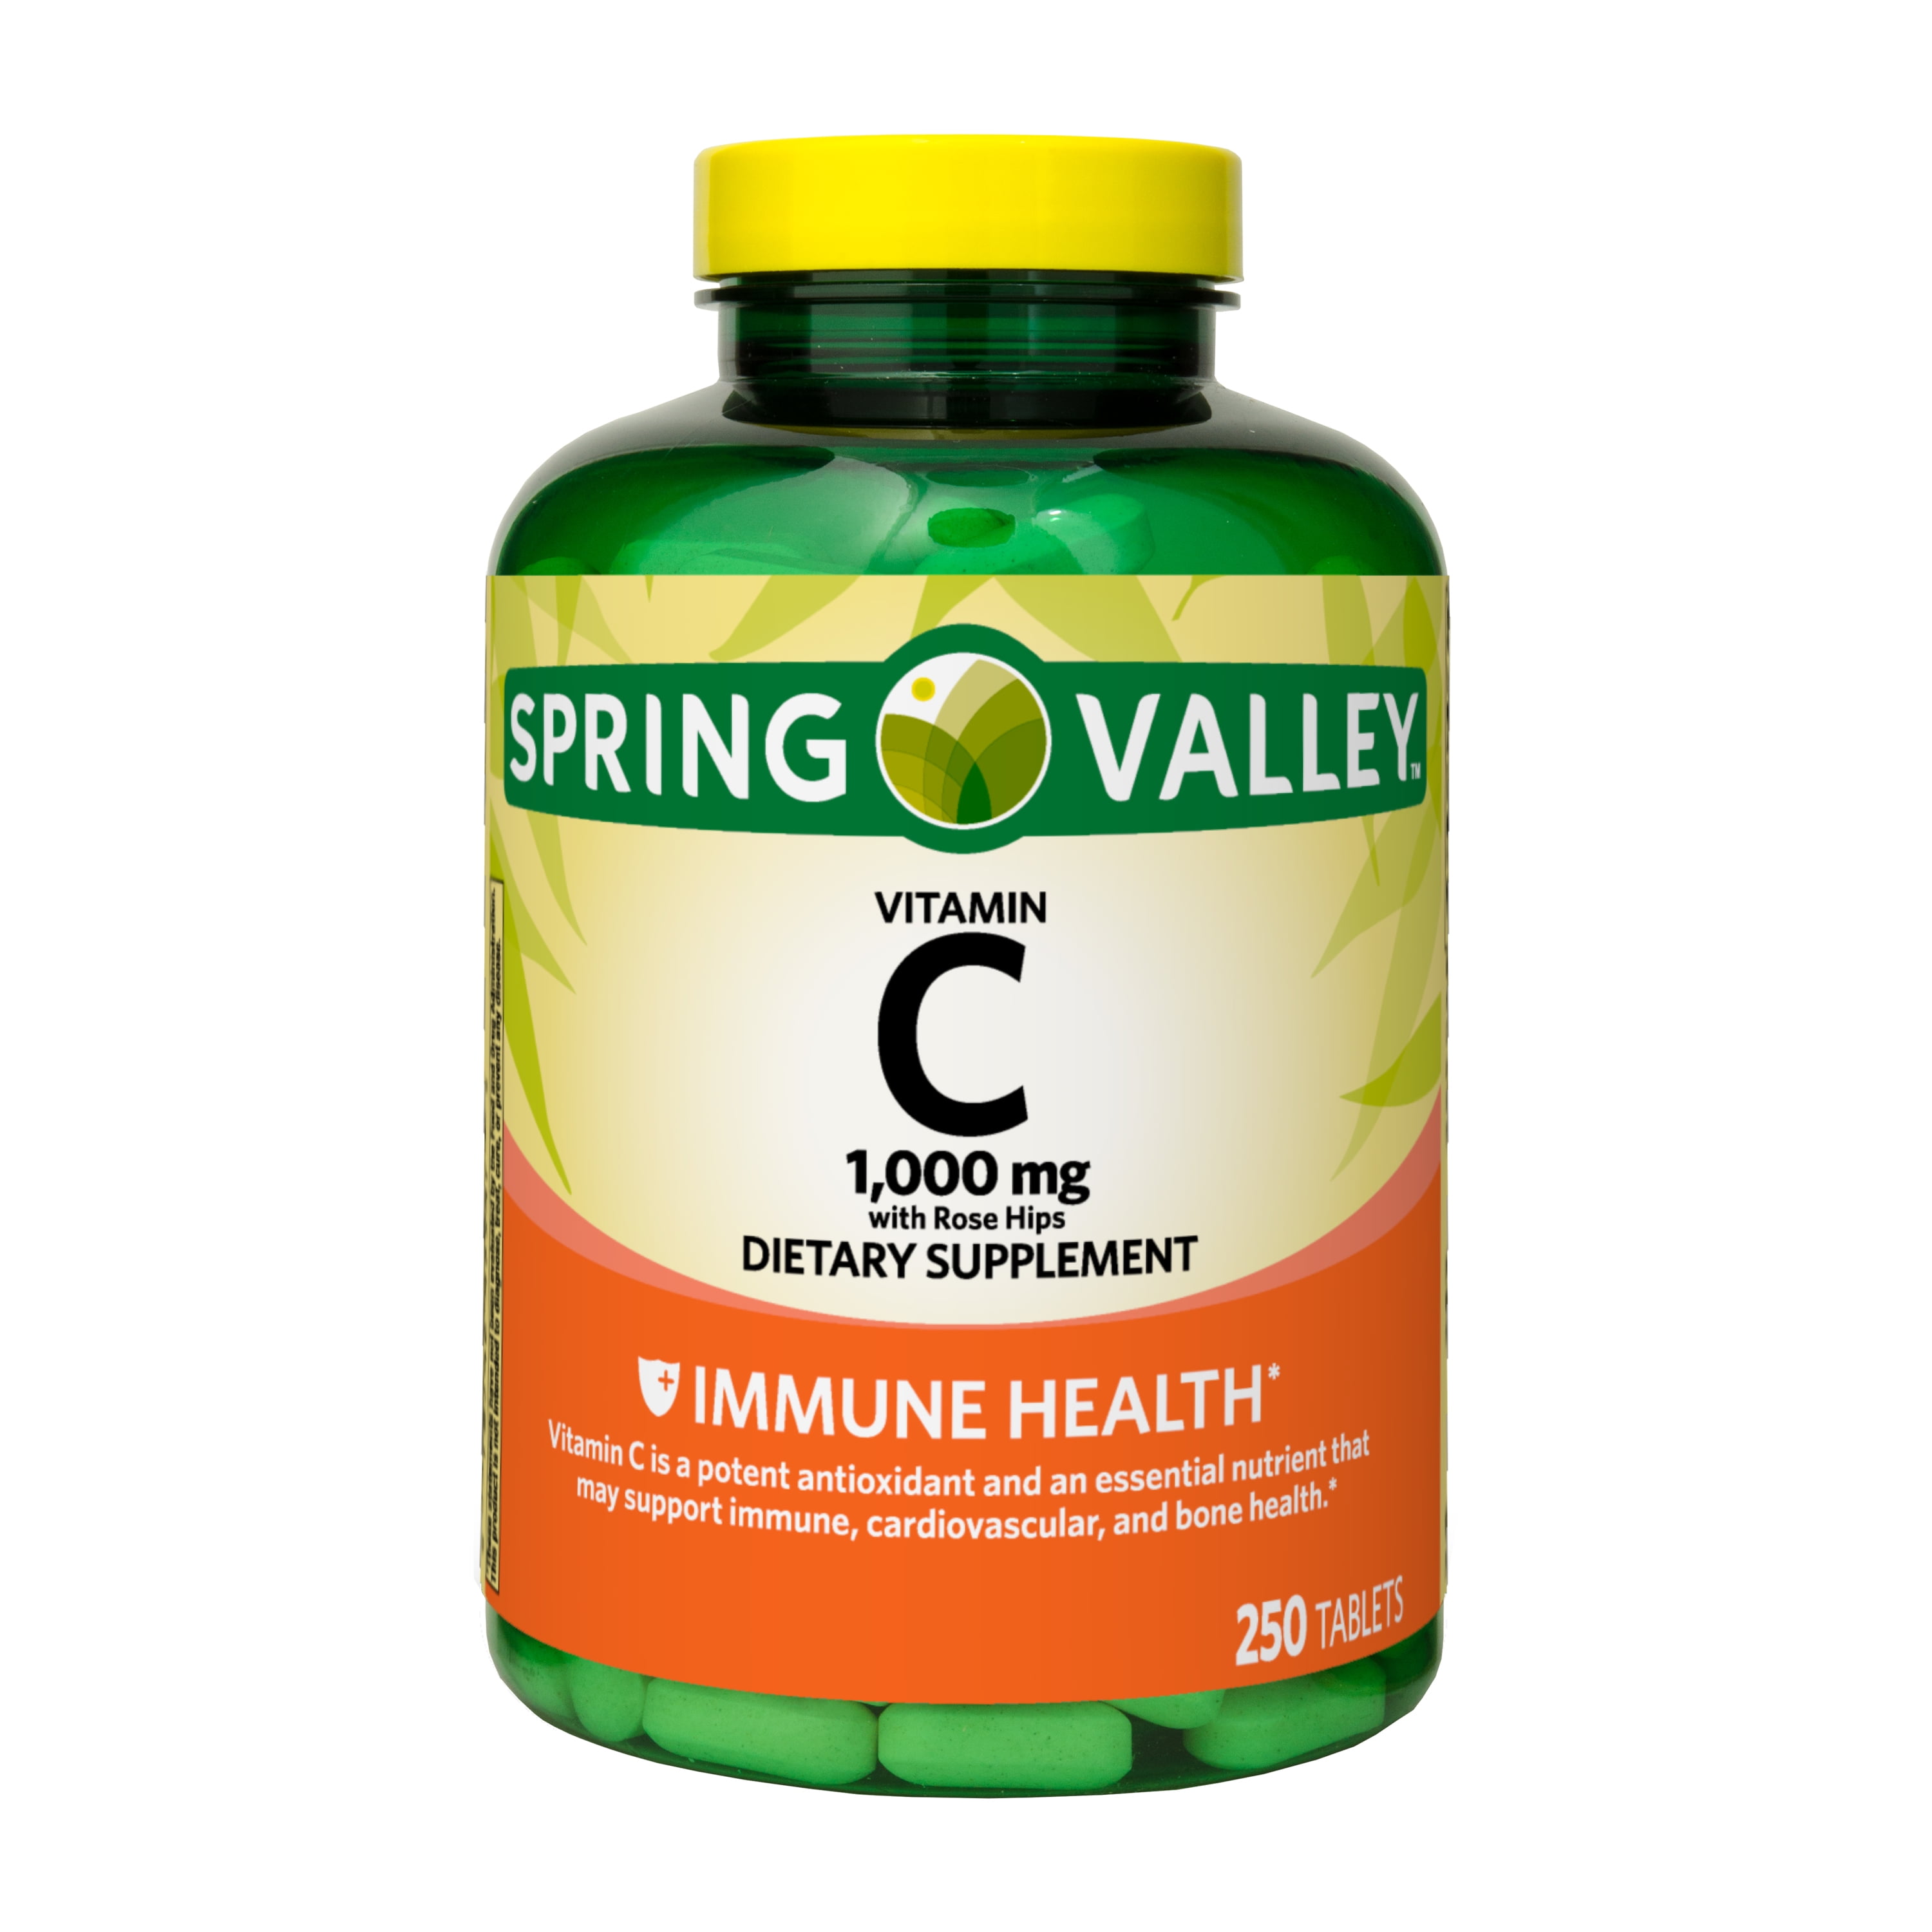 Spring Valley Vitamin C with Rose Hips Tablets Dietary Supplement, 1,000 mg, 250 Count